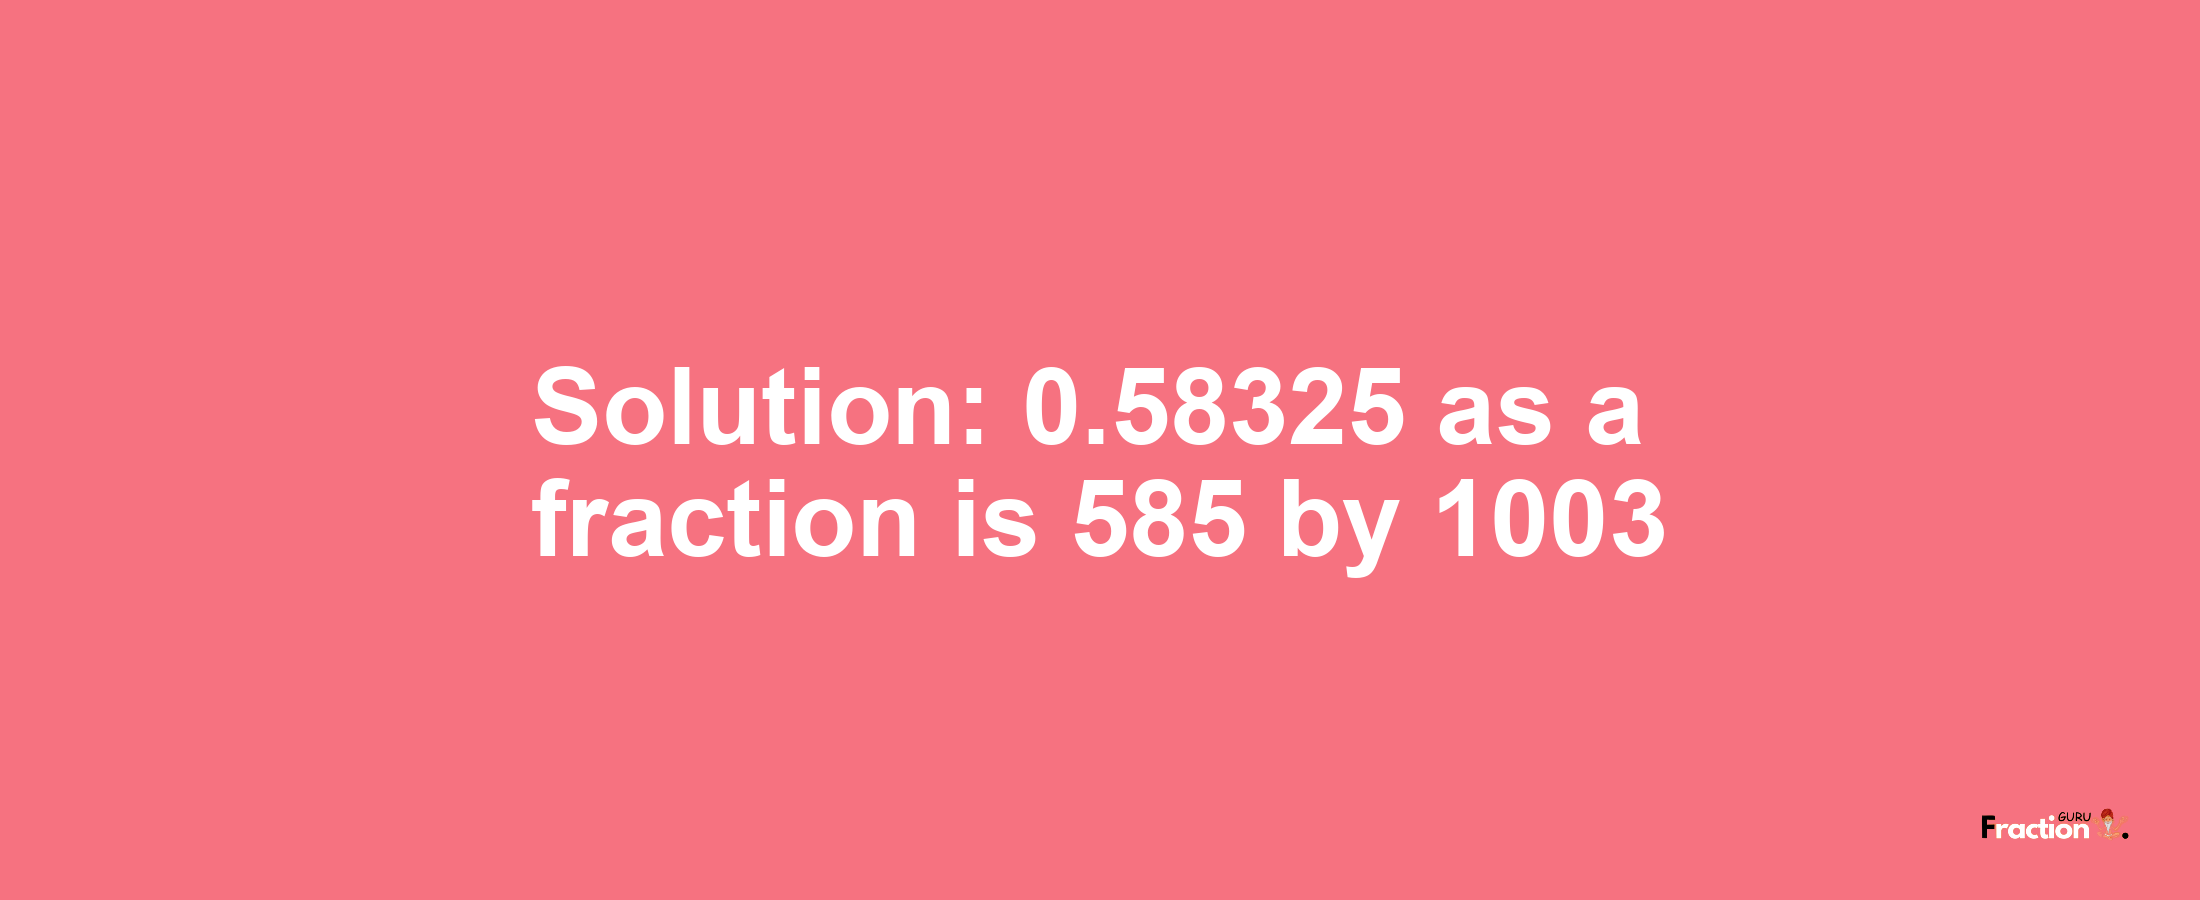 Solution:0.58325 as a fraction is 585/1003